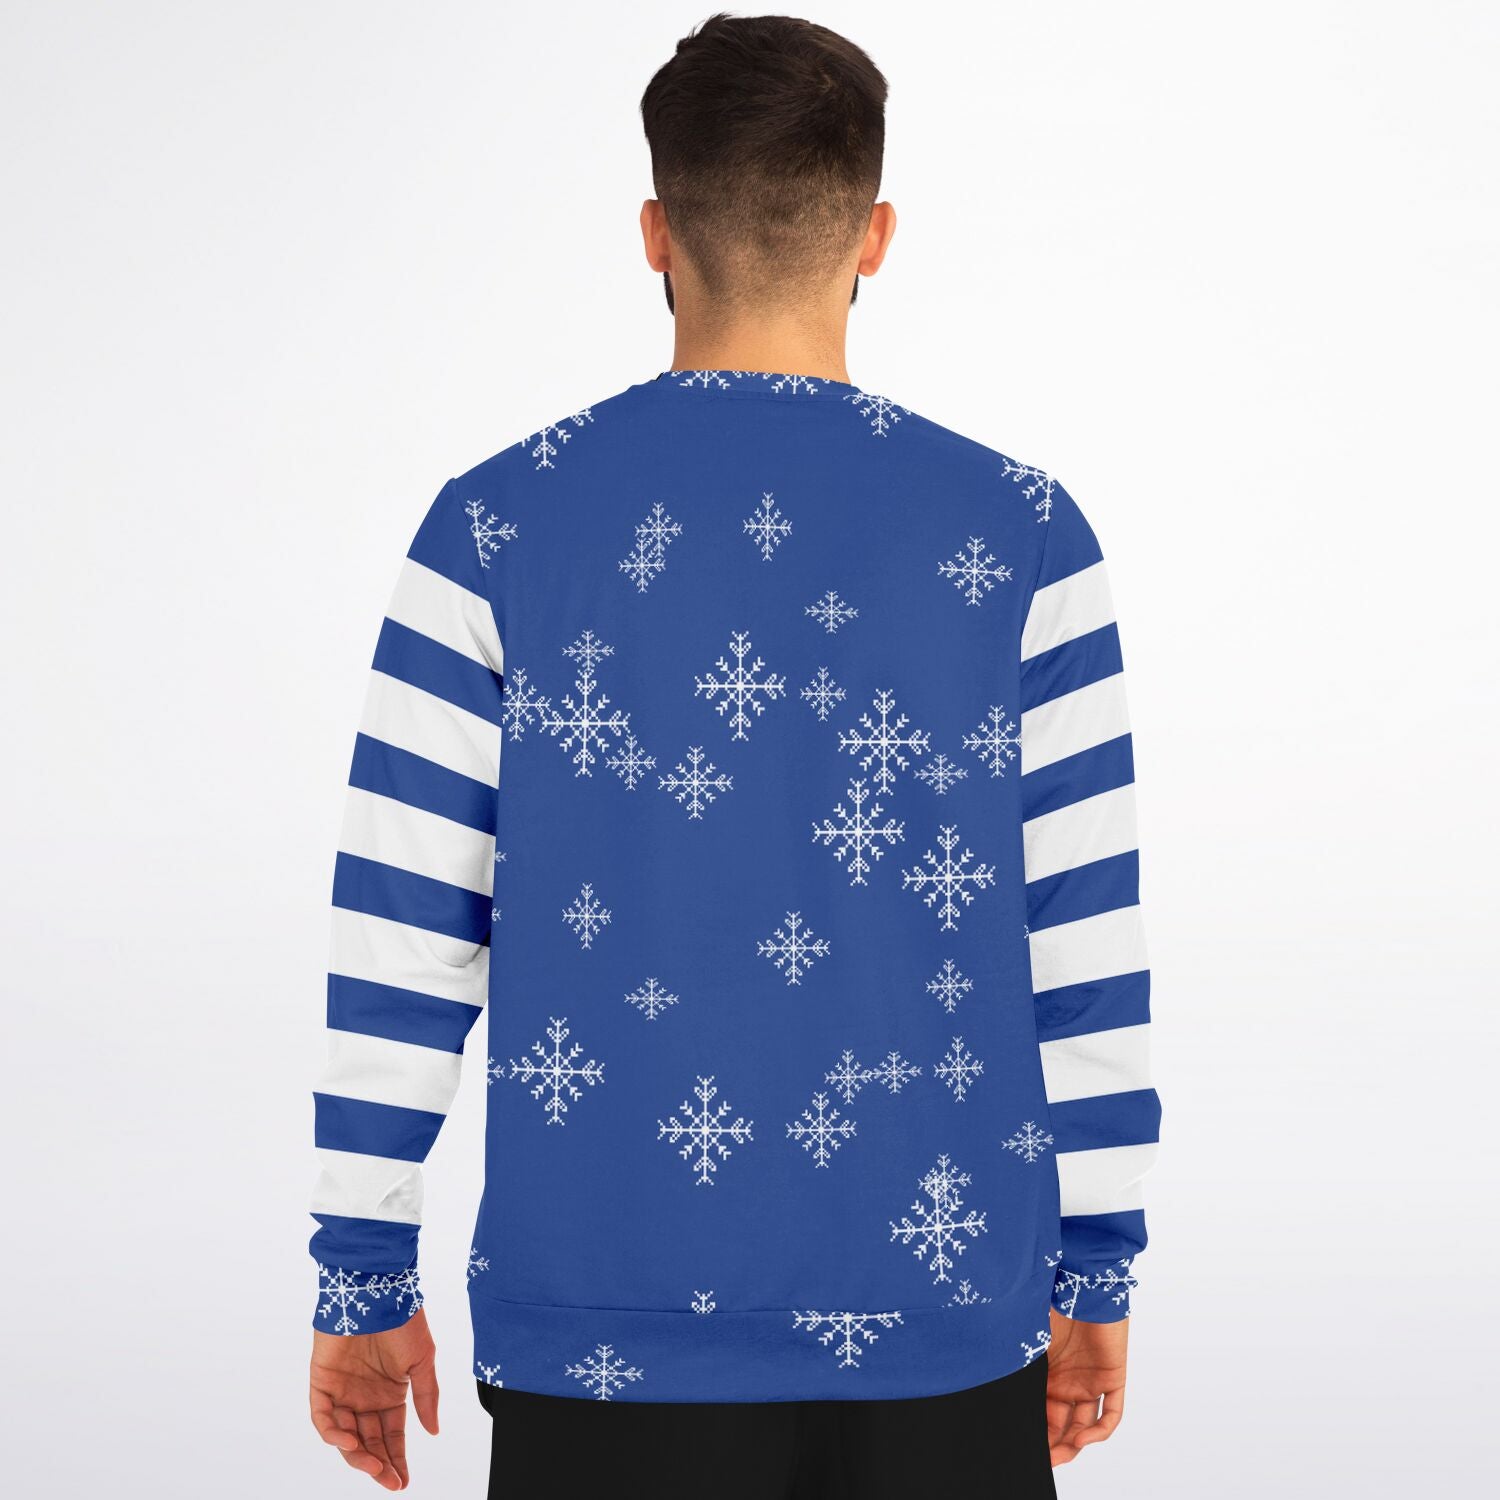 Let It Snow Ugly Christmas Sweater - OnlyClout